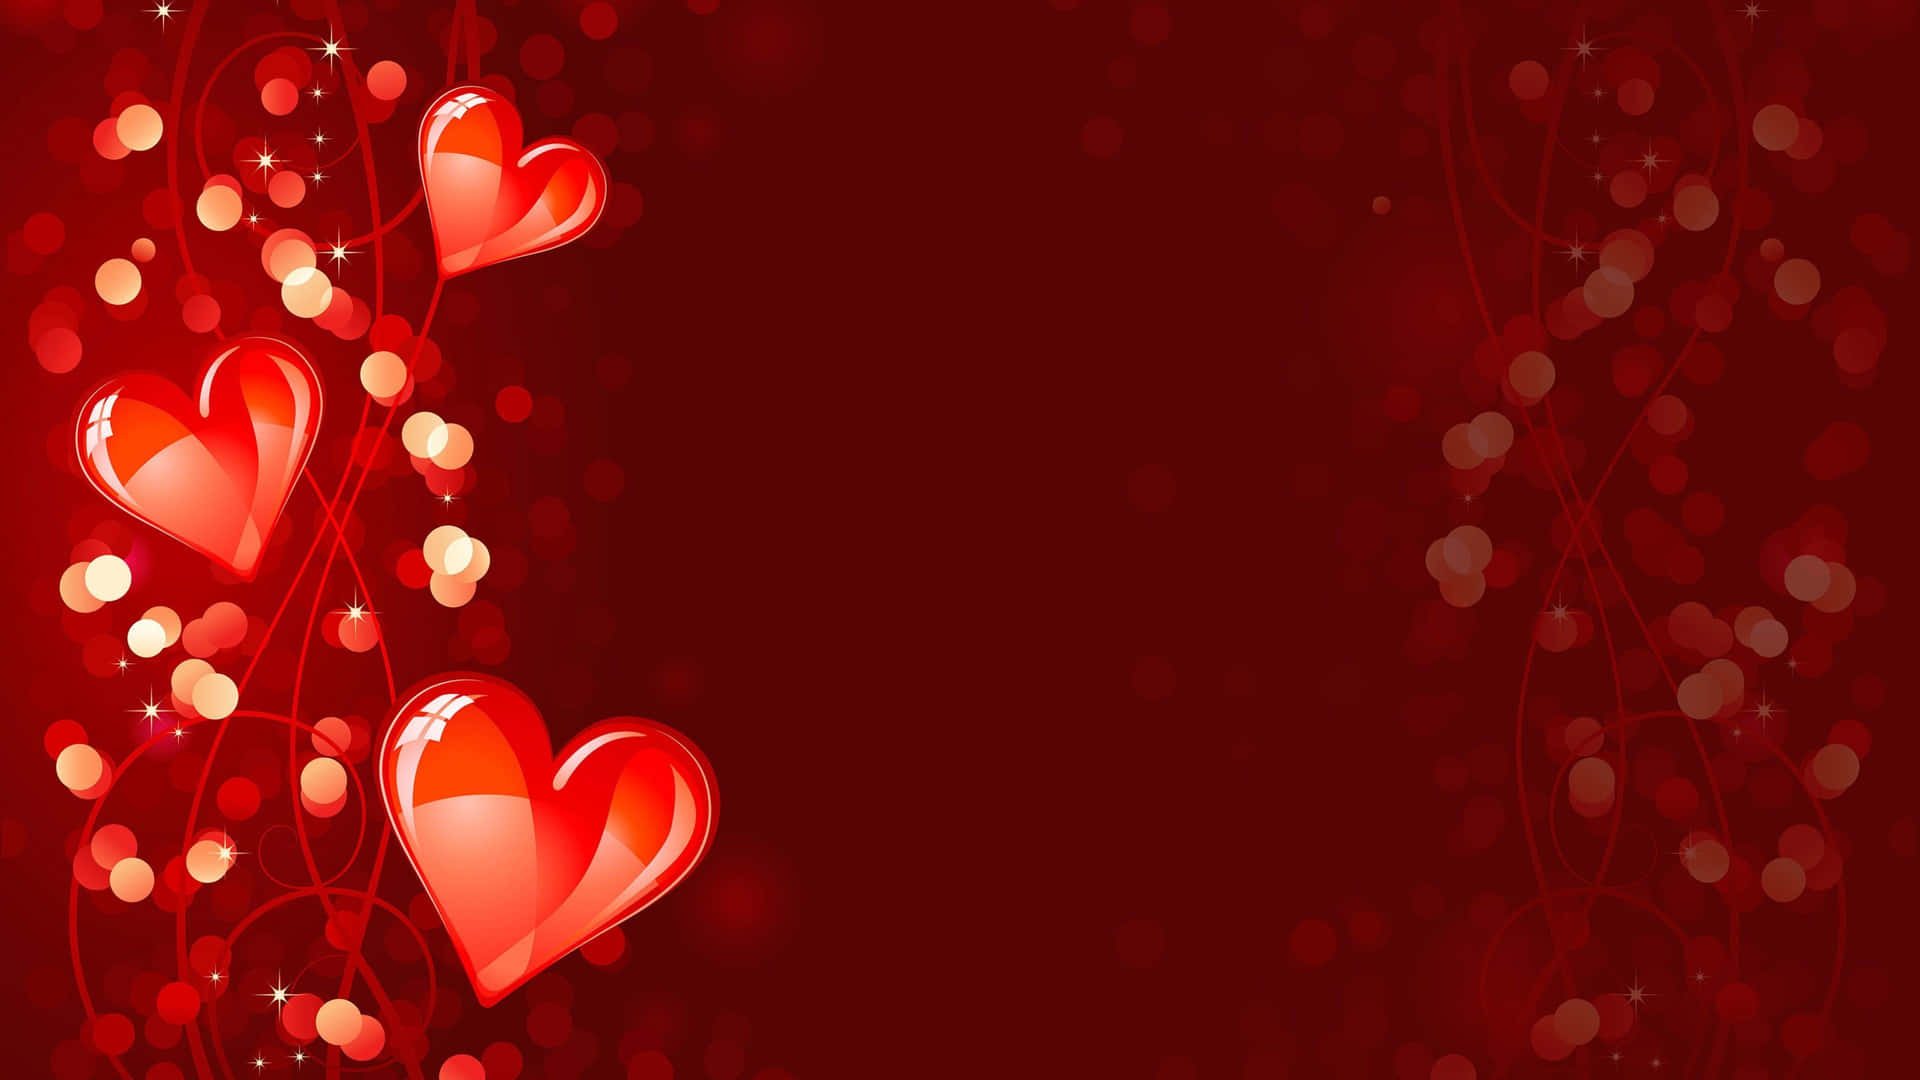 Captivating Red Heart Background Wallpaper